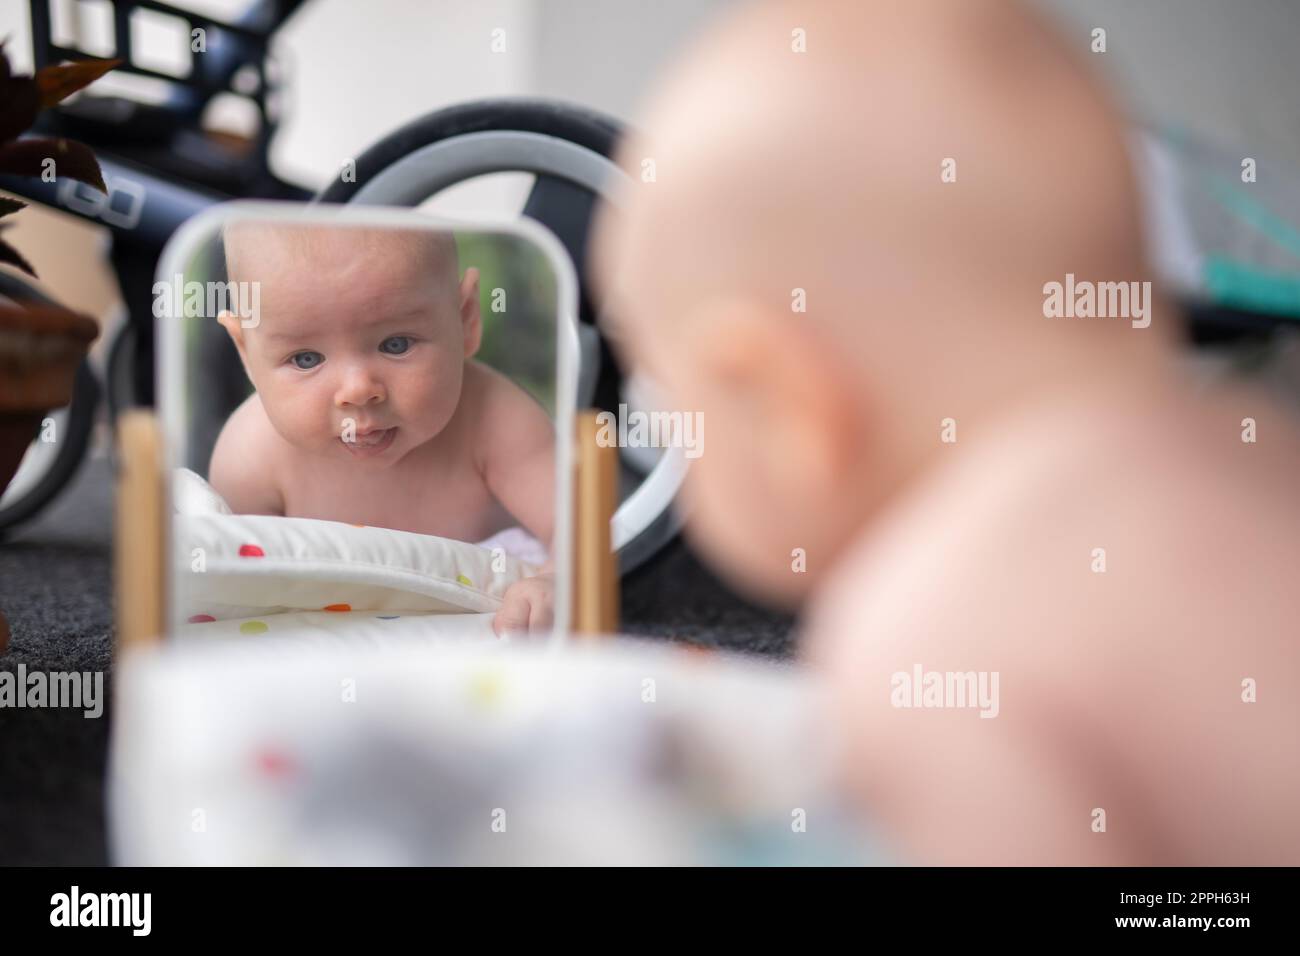 Beautiful shot of a cute baby boy looking at his reflection in the mirror. Stock Photo